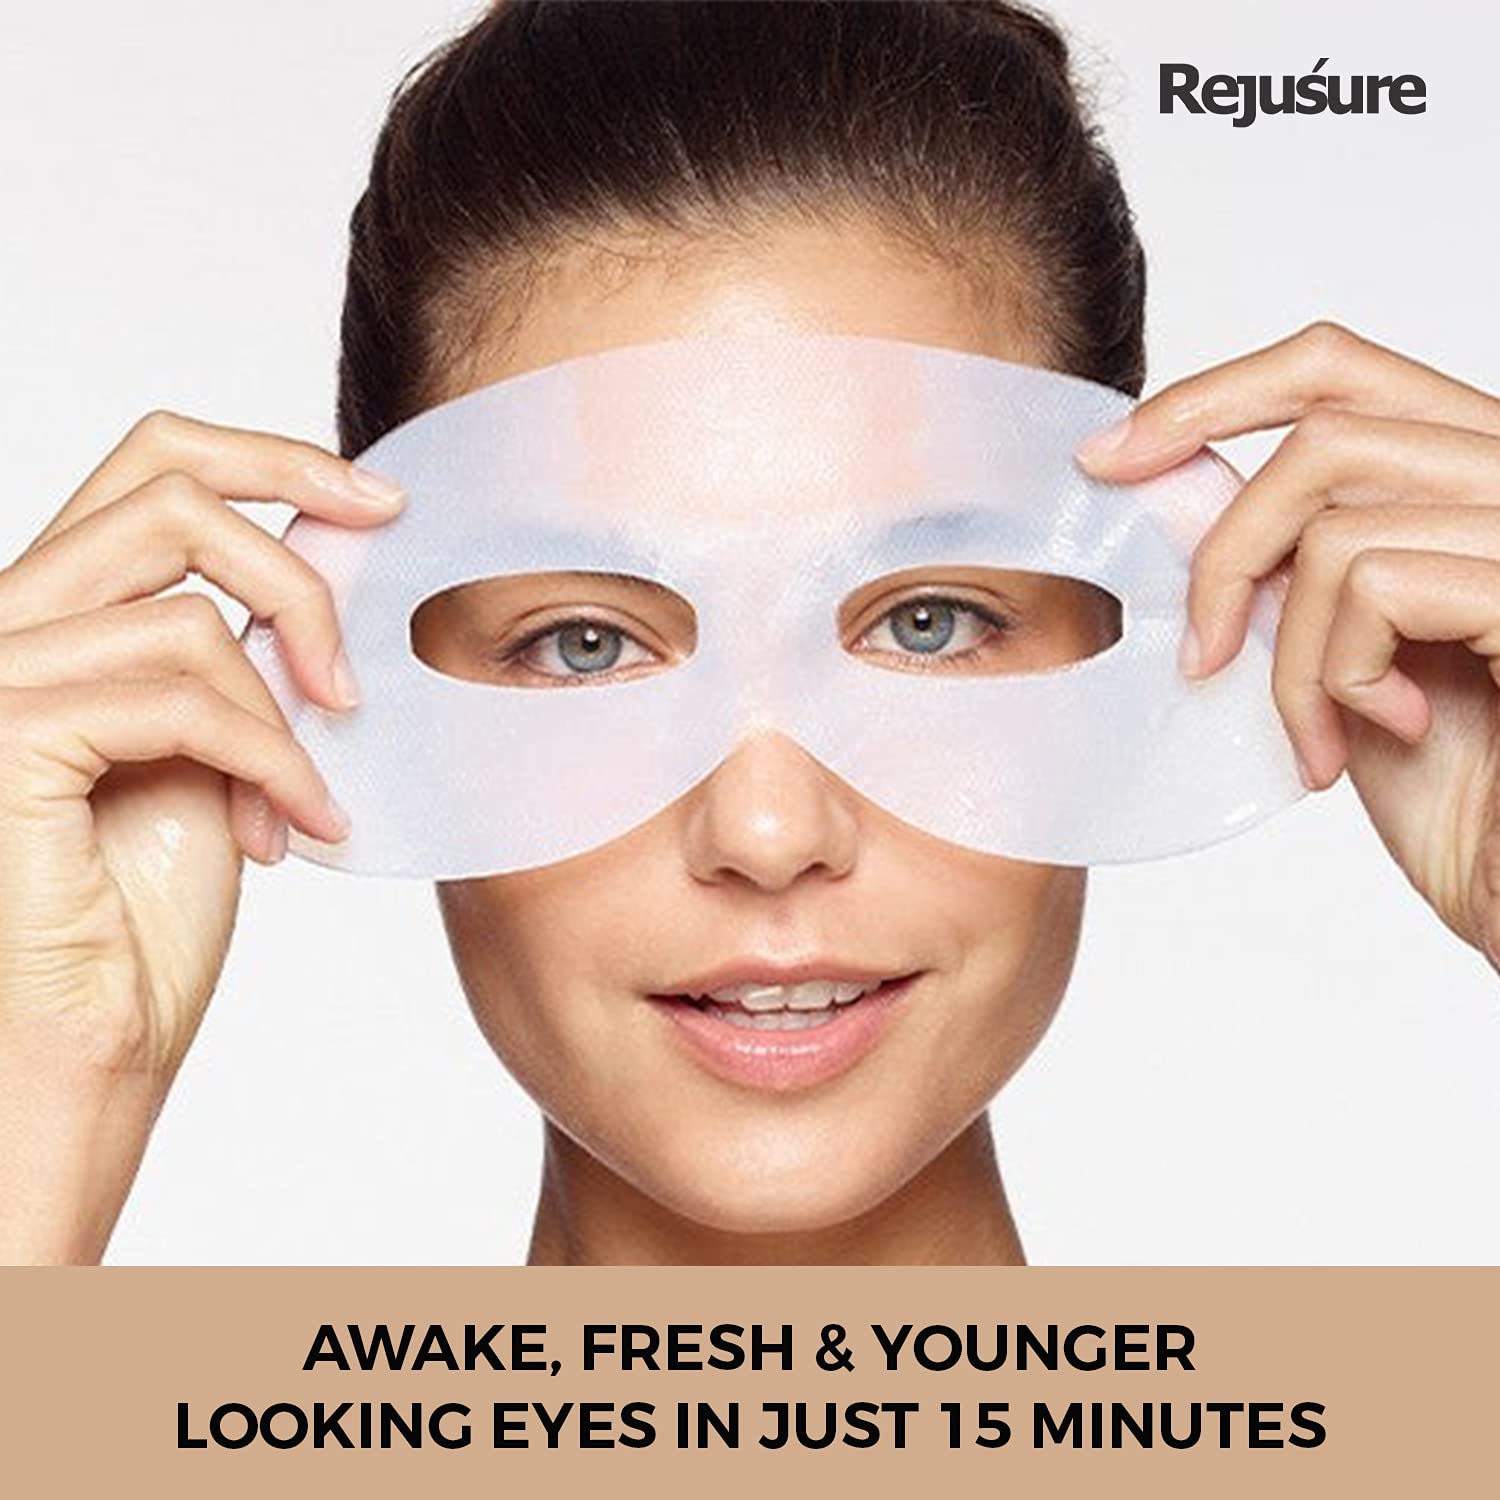 Rejusure Eye Brightening Serum Mask - Brightens, Hydrates, and Minimmizes Dark Circles | Dermatologist & Clinically Tested | Skin Care | Men & Women - 1 Mask (Pack of 2)